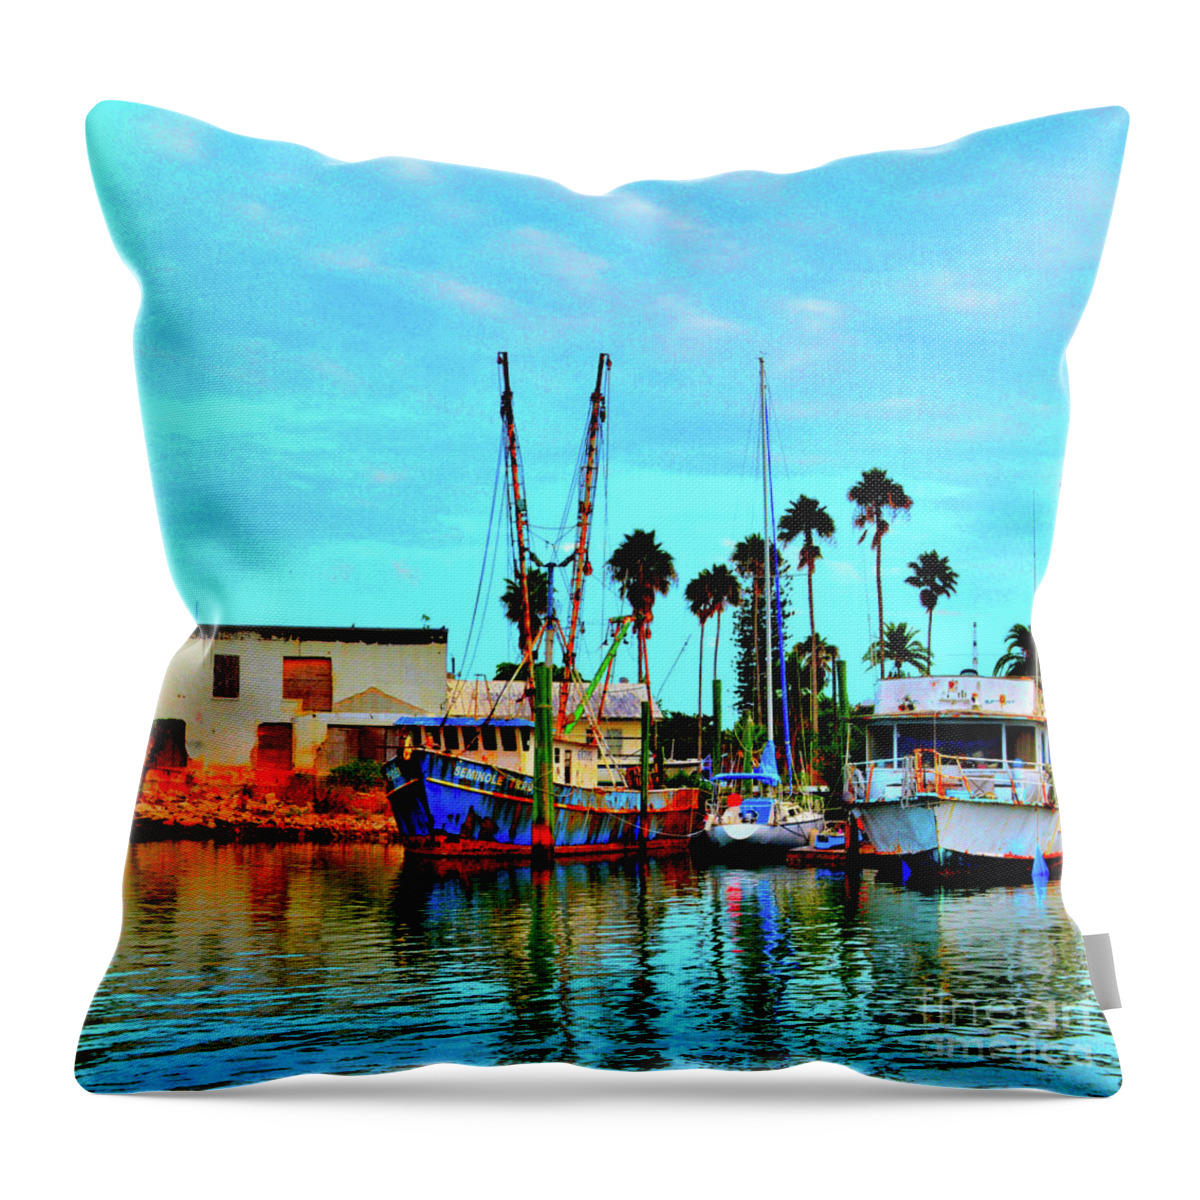 Art Throw Pillow featuring the photograph The Past by Alison Belsan Horton